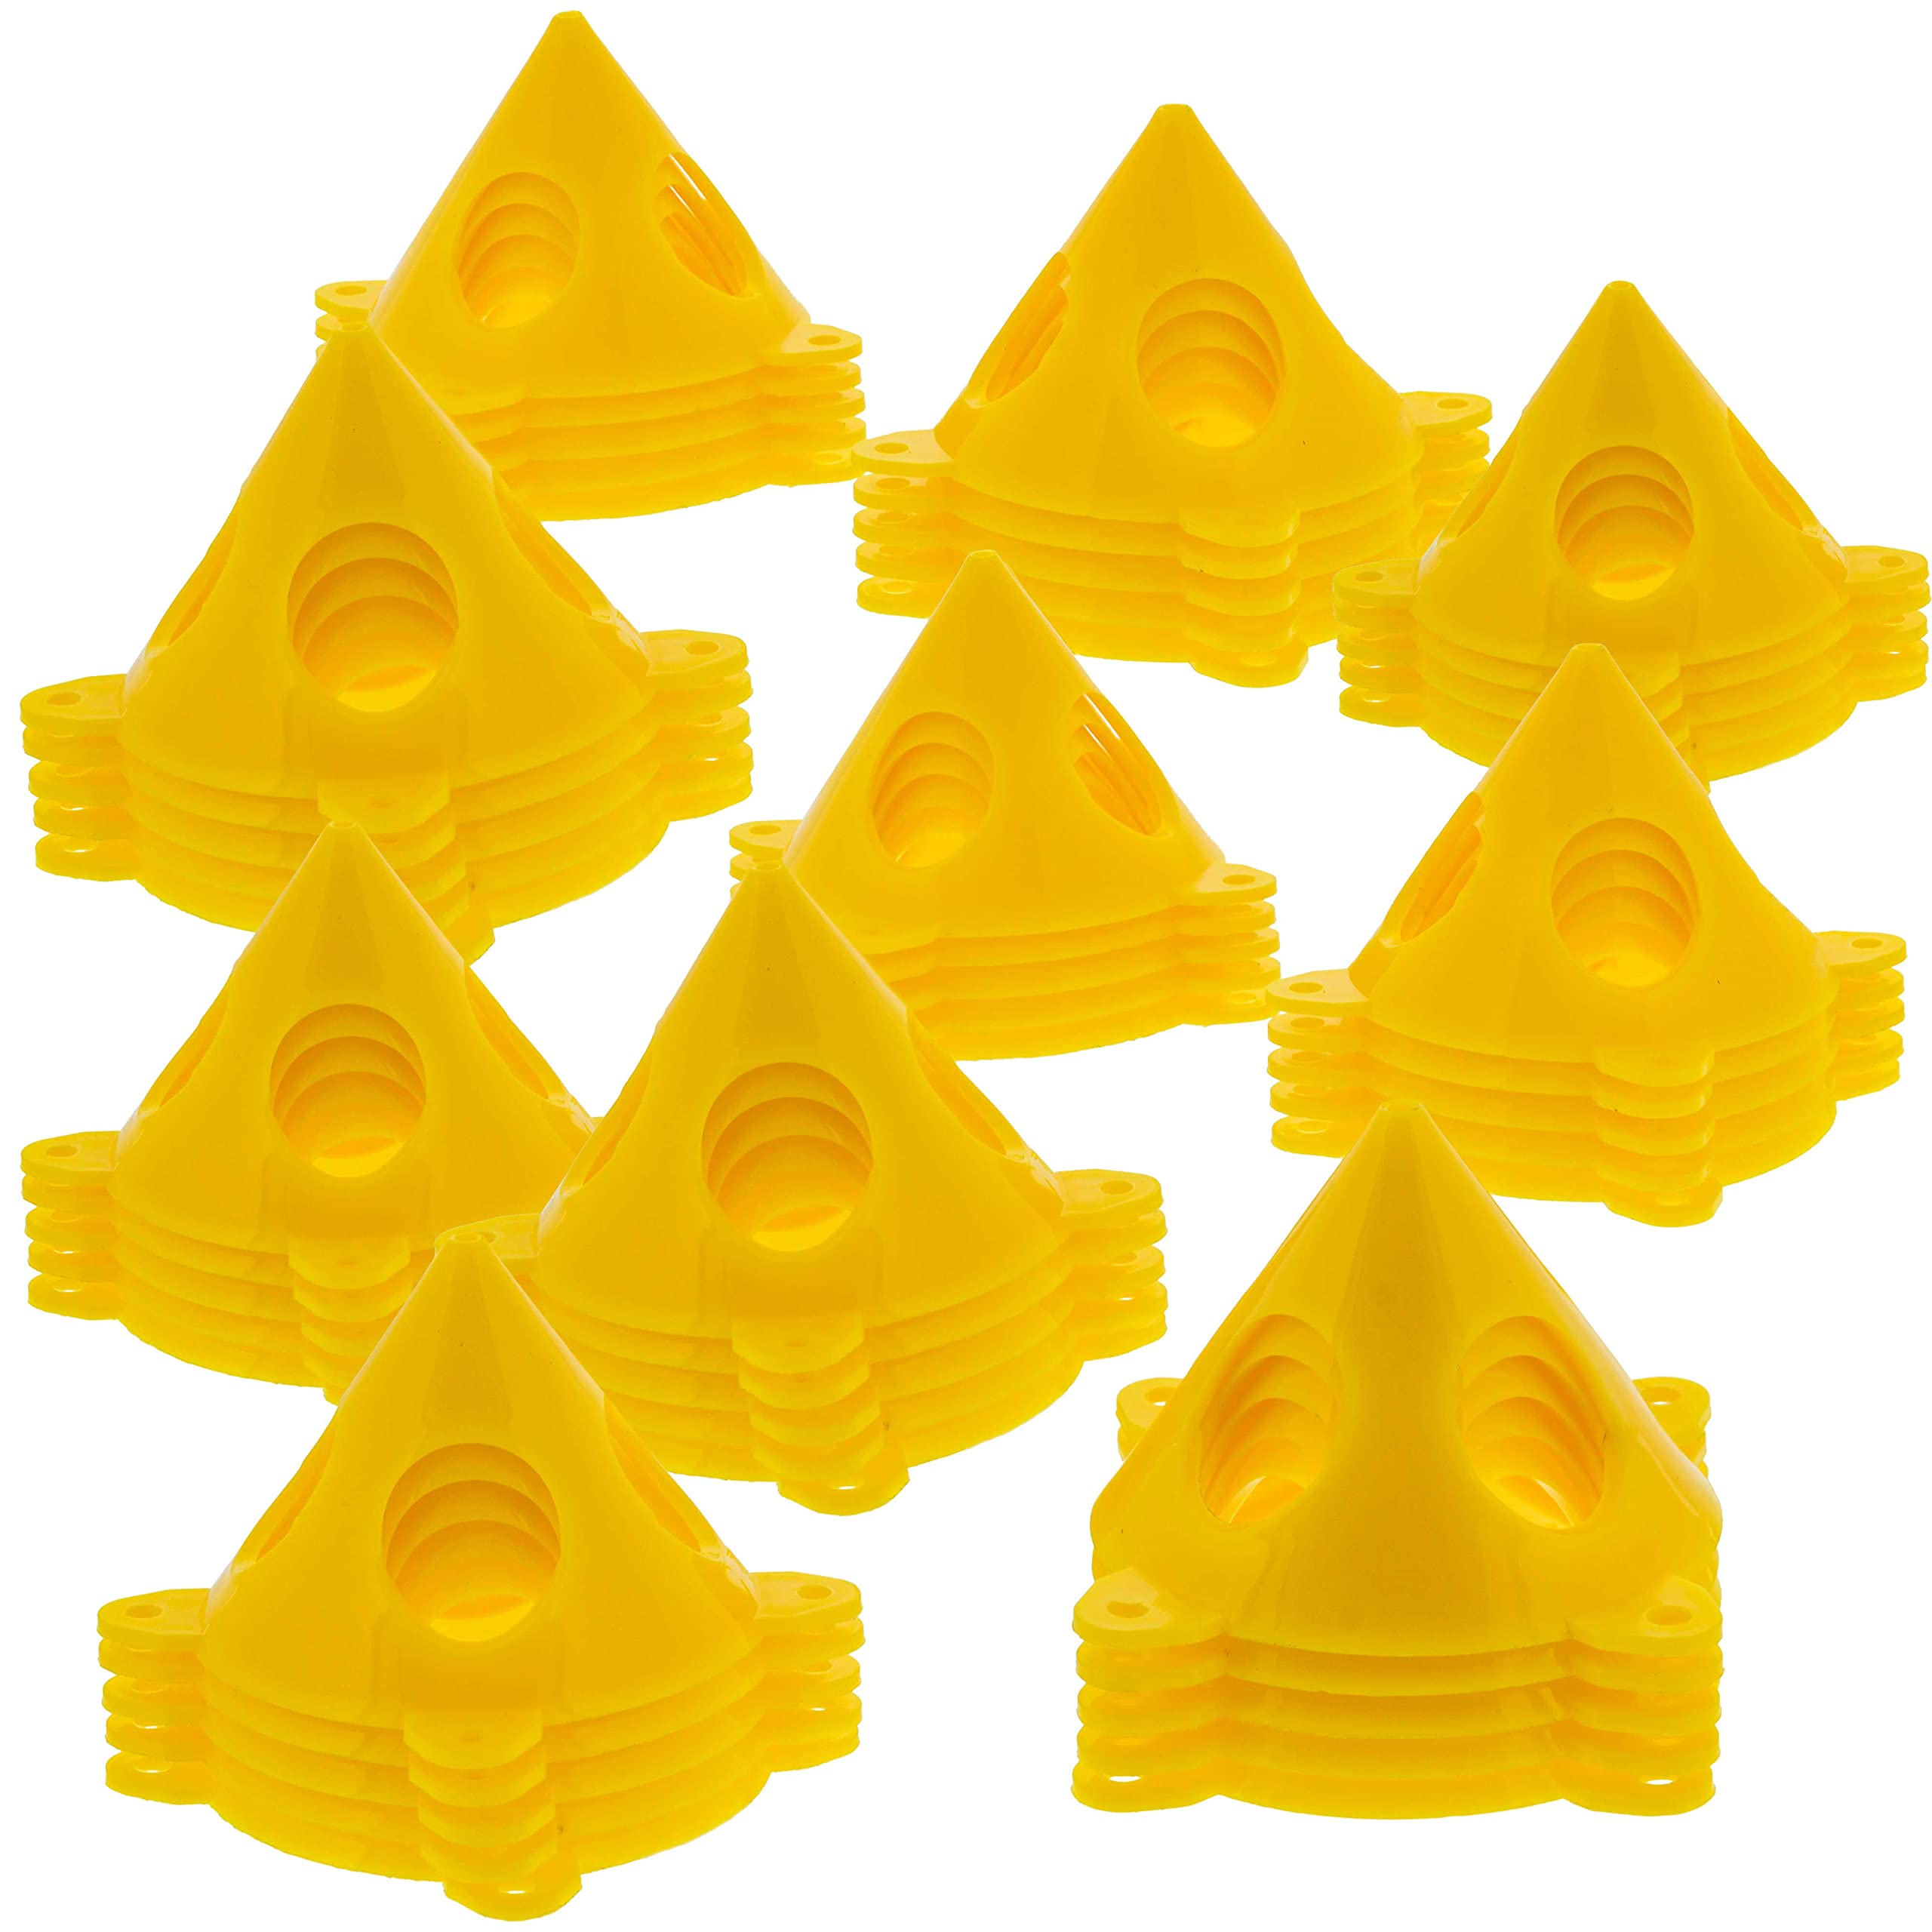 U.S. Art Supply Yellow Cone Canvas and Cabinet Door Risers - Acrylic and Epoxy Pouring Paint Canvas Support Stands (Pack of 50) Great to get Your Canvas or Cabinet Doors Pyramid Triangle Risers